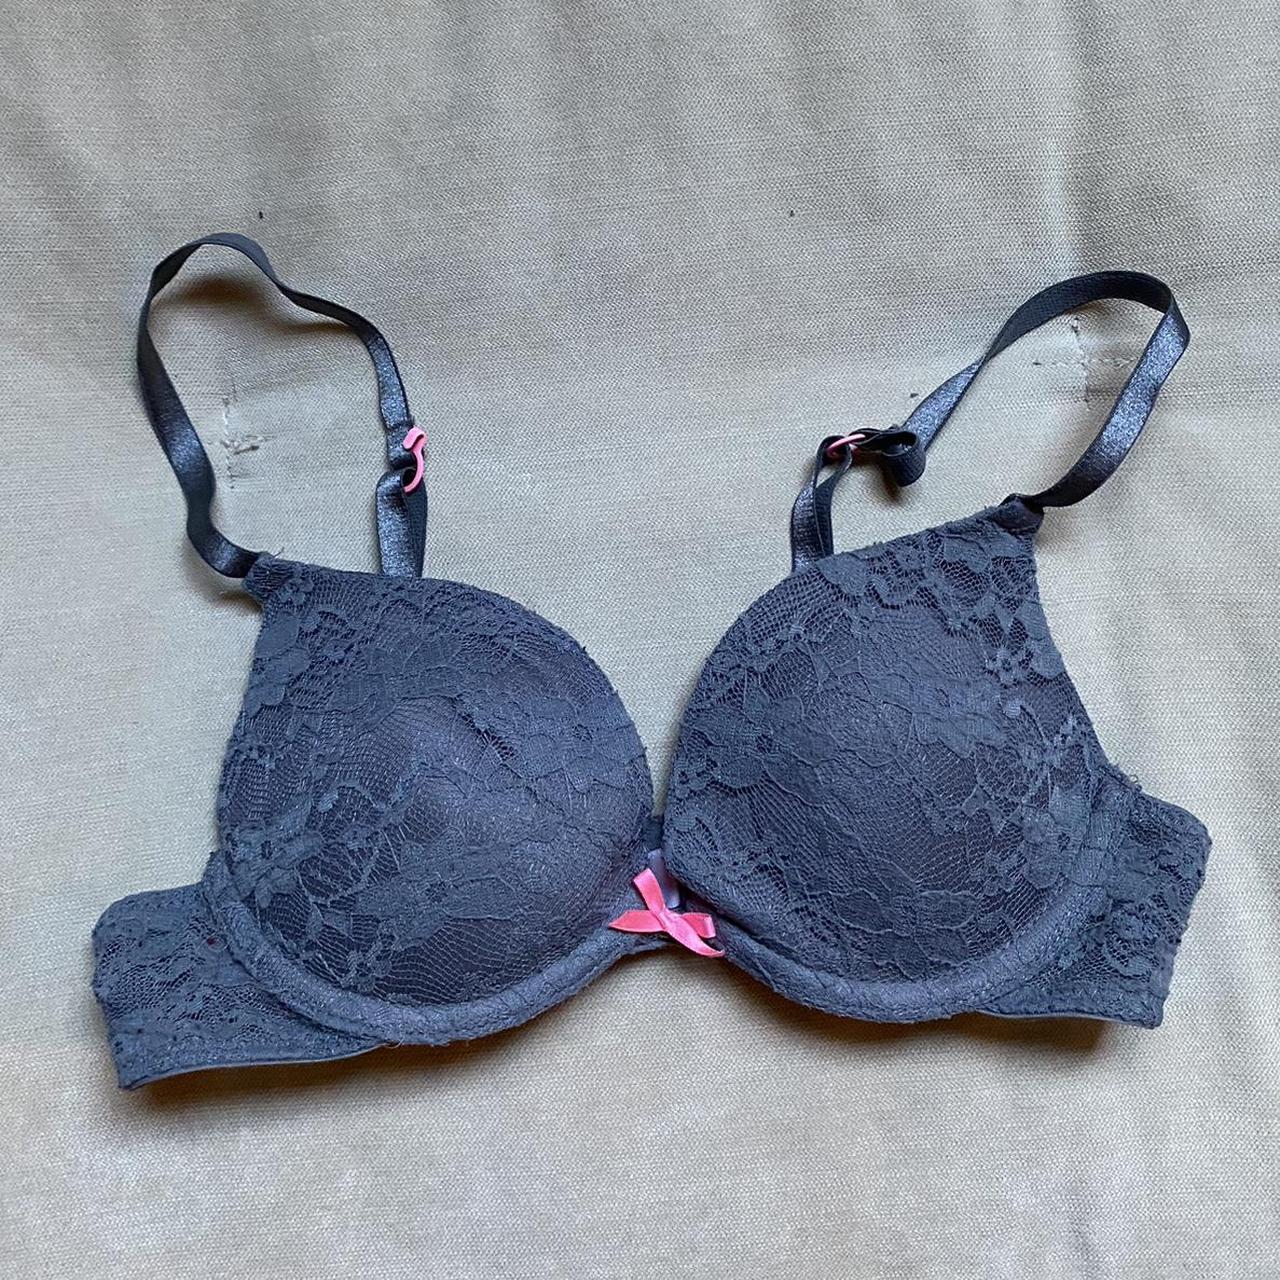 PINK LACE BRA The detail in this bra is - Depop